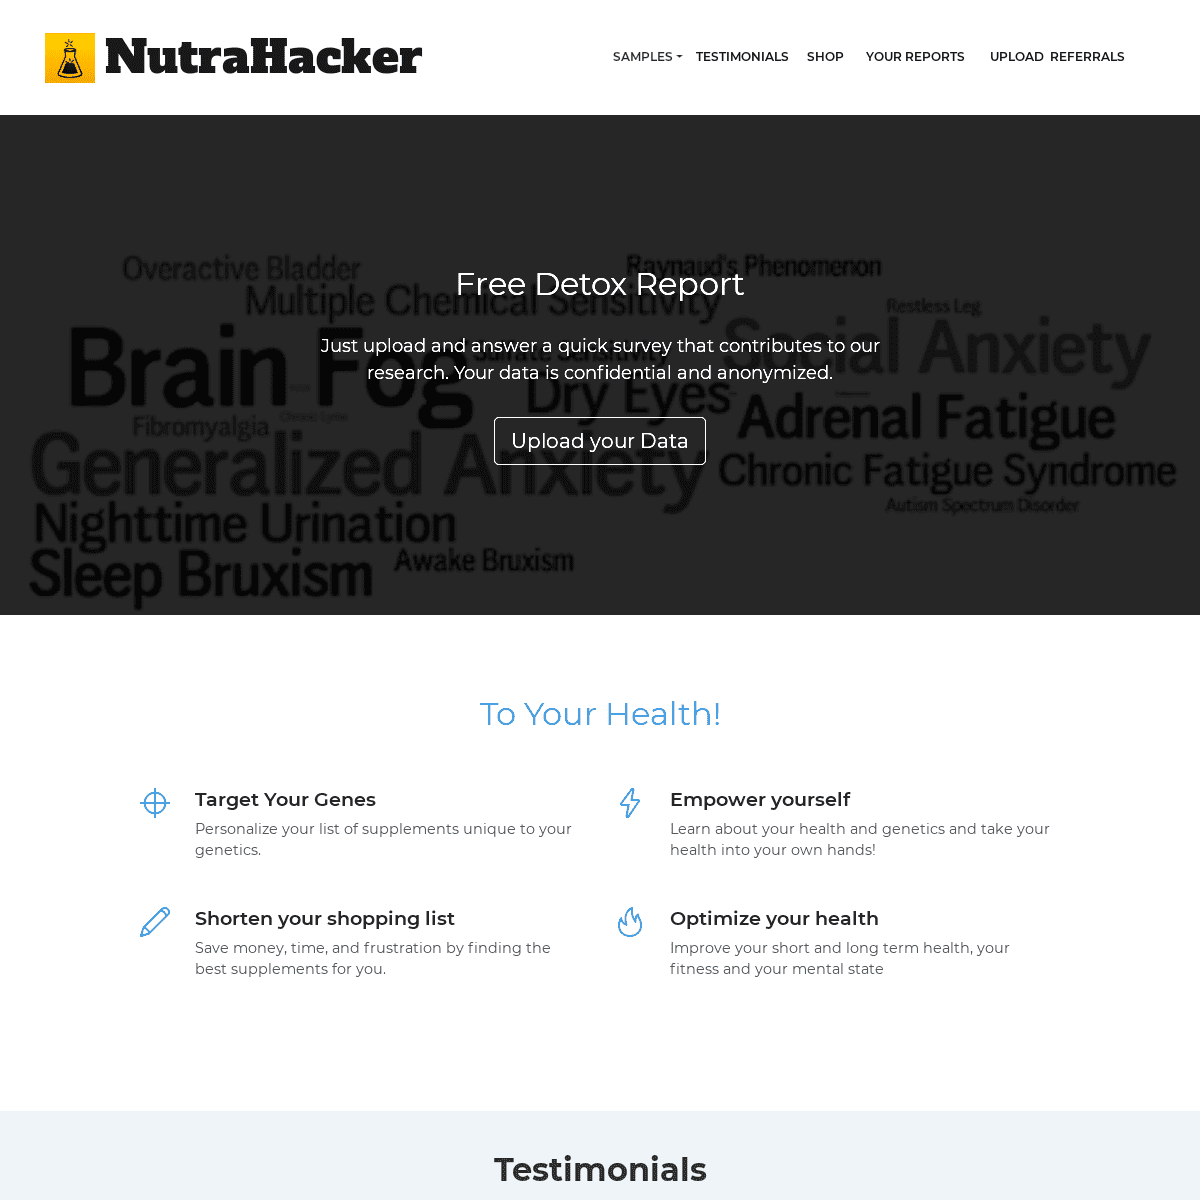 Welcome to NutraHacker! Upload 23andMe or Ancestry data